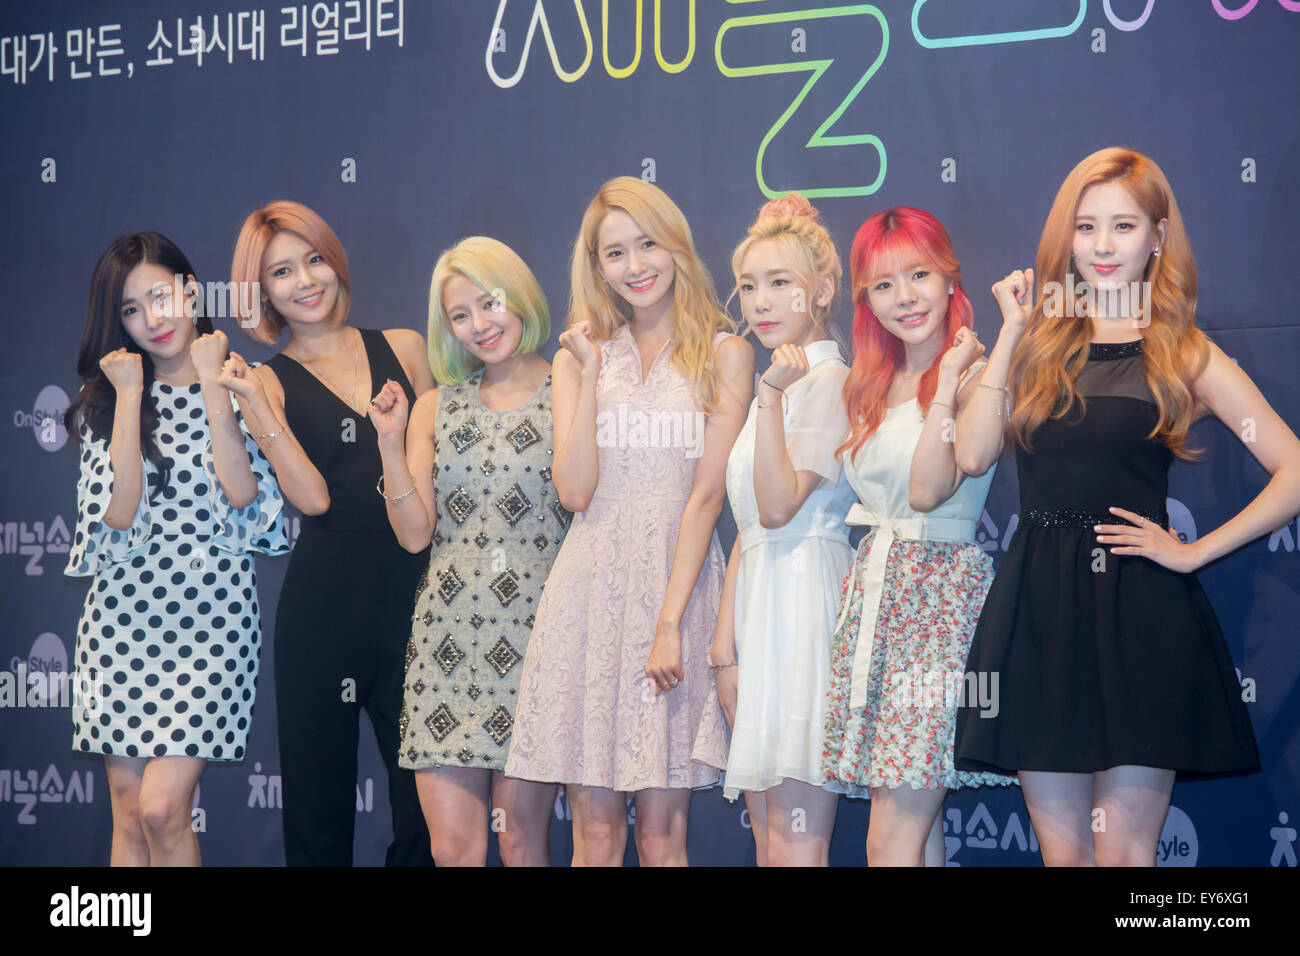 Girls' Generation, Jul 21, 2015 : (L-R) Tiffany, Soo-Young, Hyo-Yeon, Yoon-A, Tae-Yeon, Sunny and Seo-Hyun of South Korean girl Girls' Generation, attend a press for a new variety TV